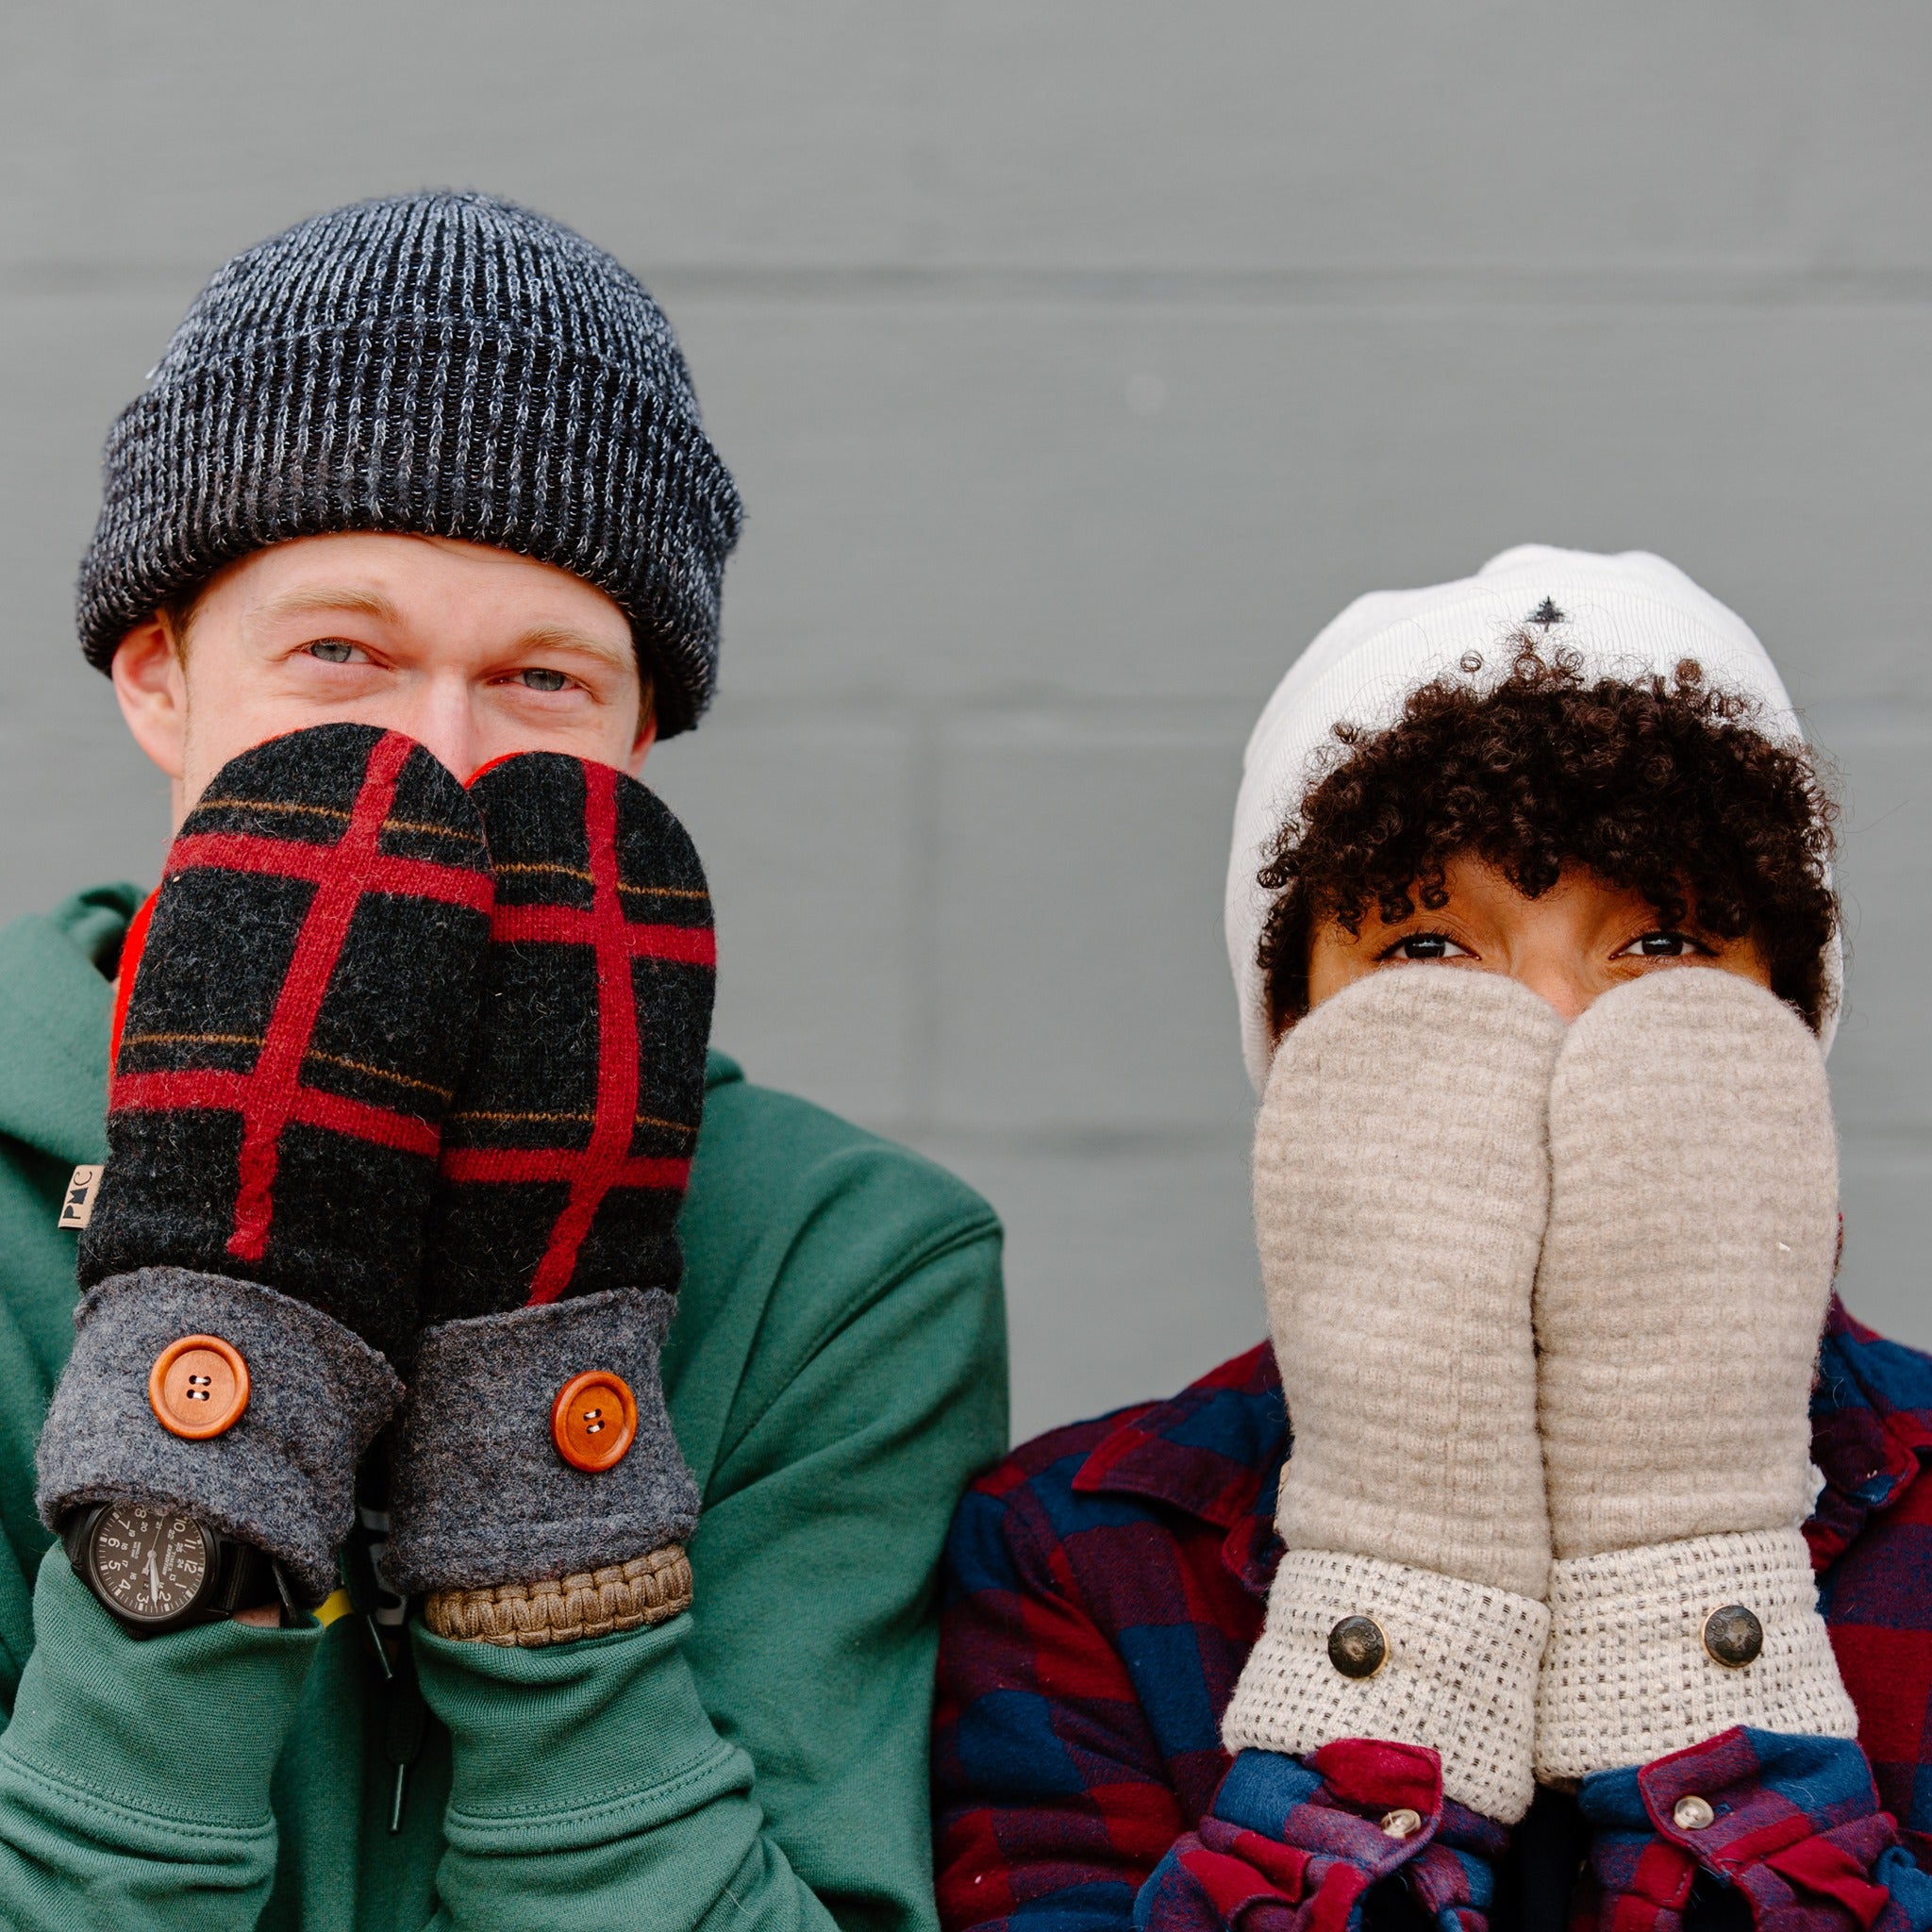 The Peapack Mitten Company Mittens